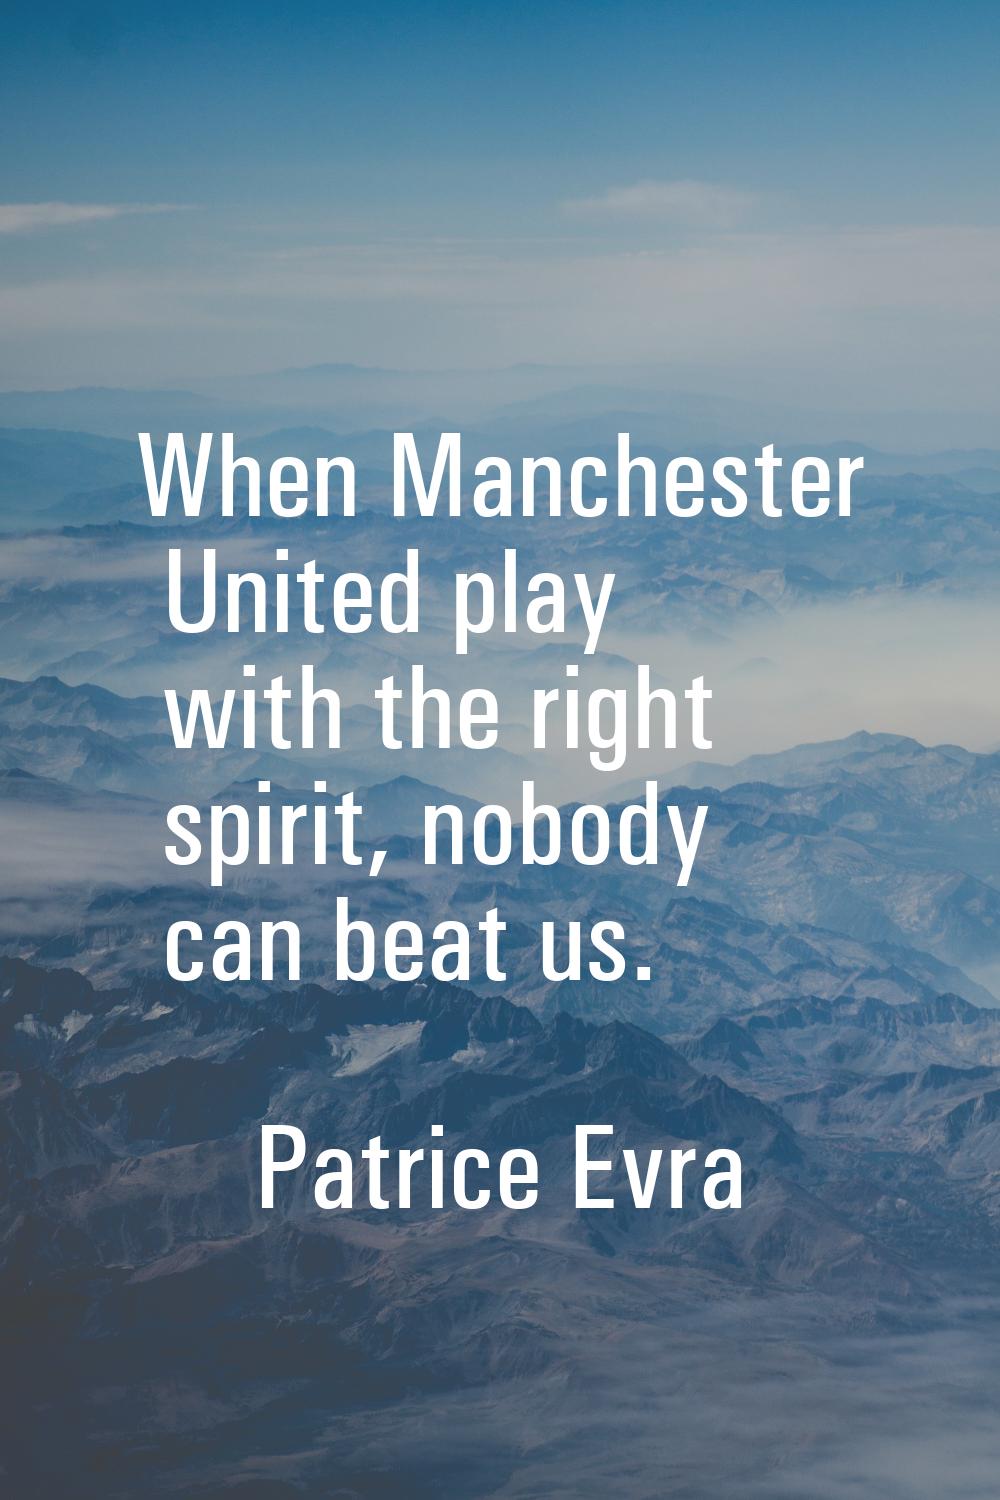 When Manchester United play with the right spirit, nobody can beat us.